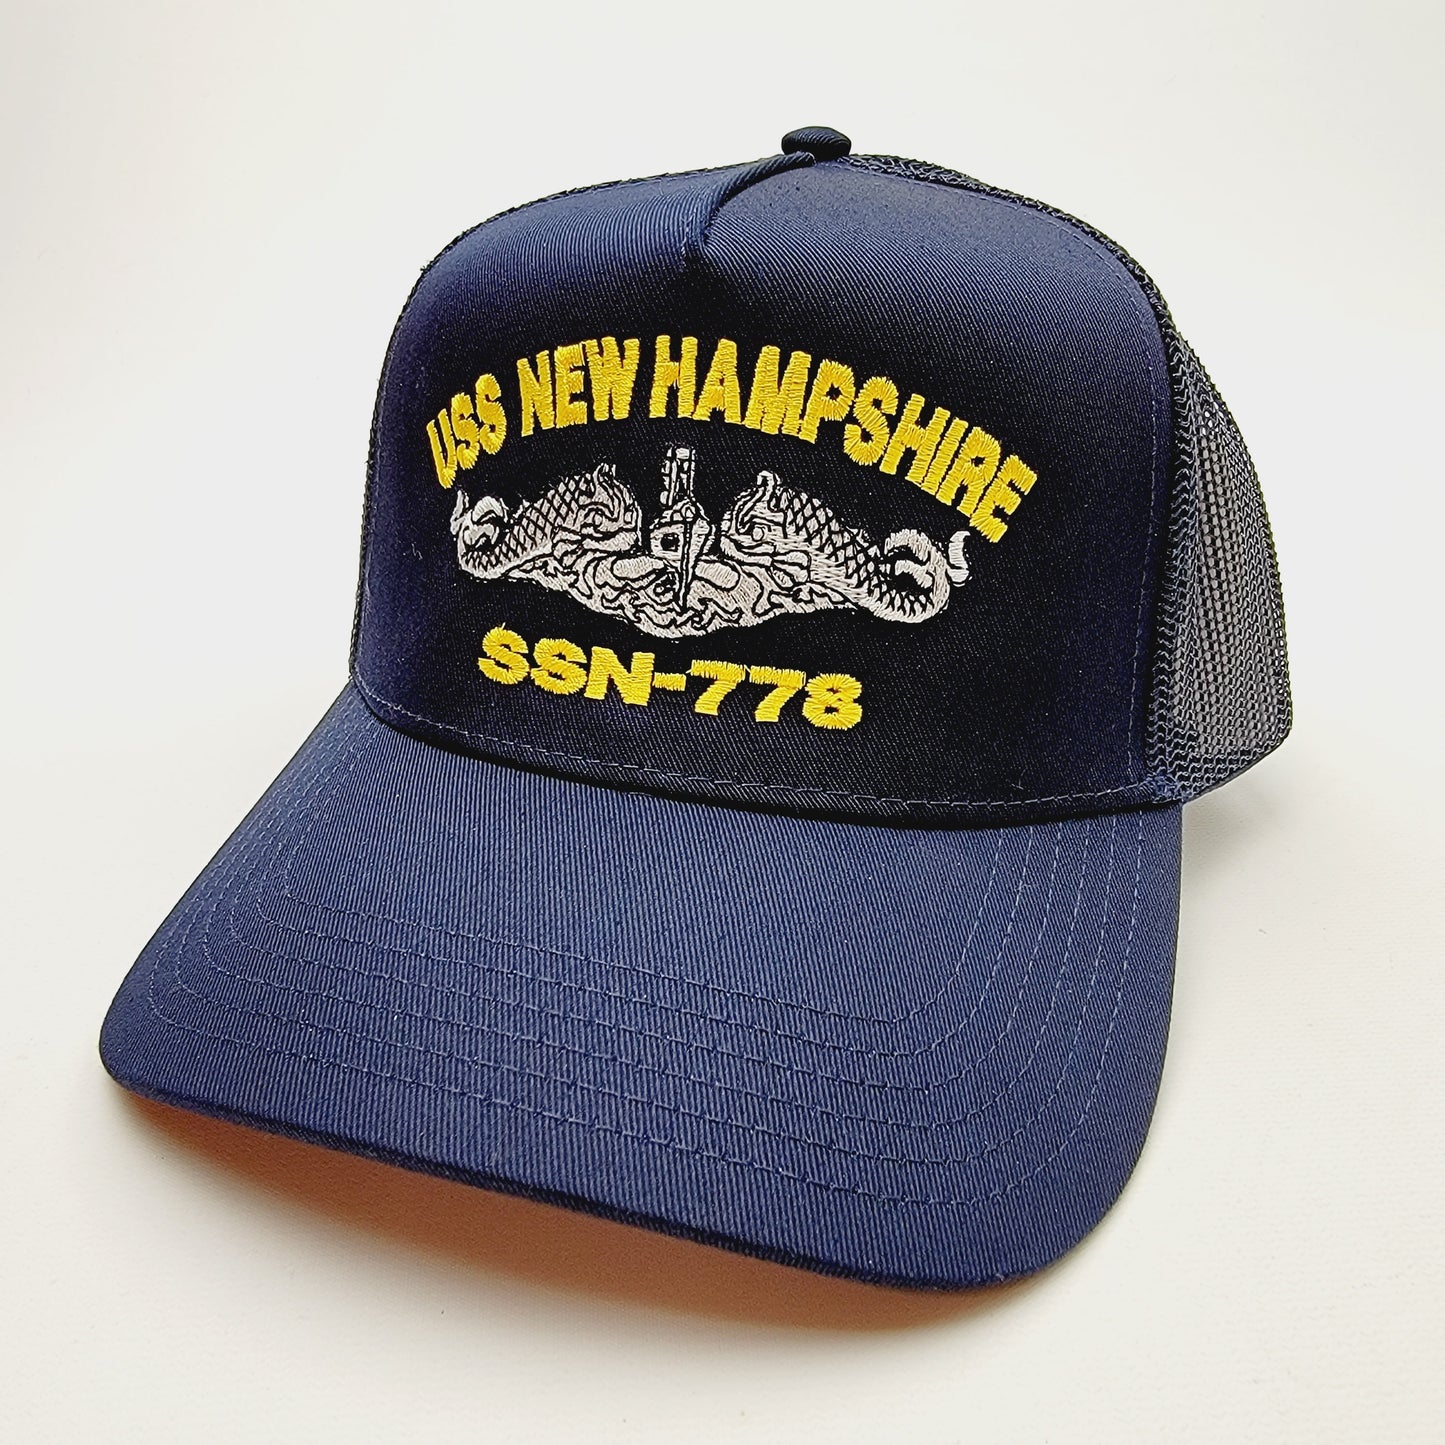 US NAVY USS NEW HAMPSHIRE SSN-778 Embroidered Hat Baseball Cap Adjustable Blue